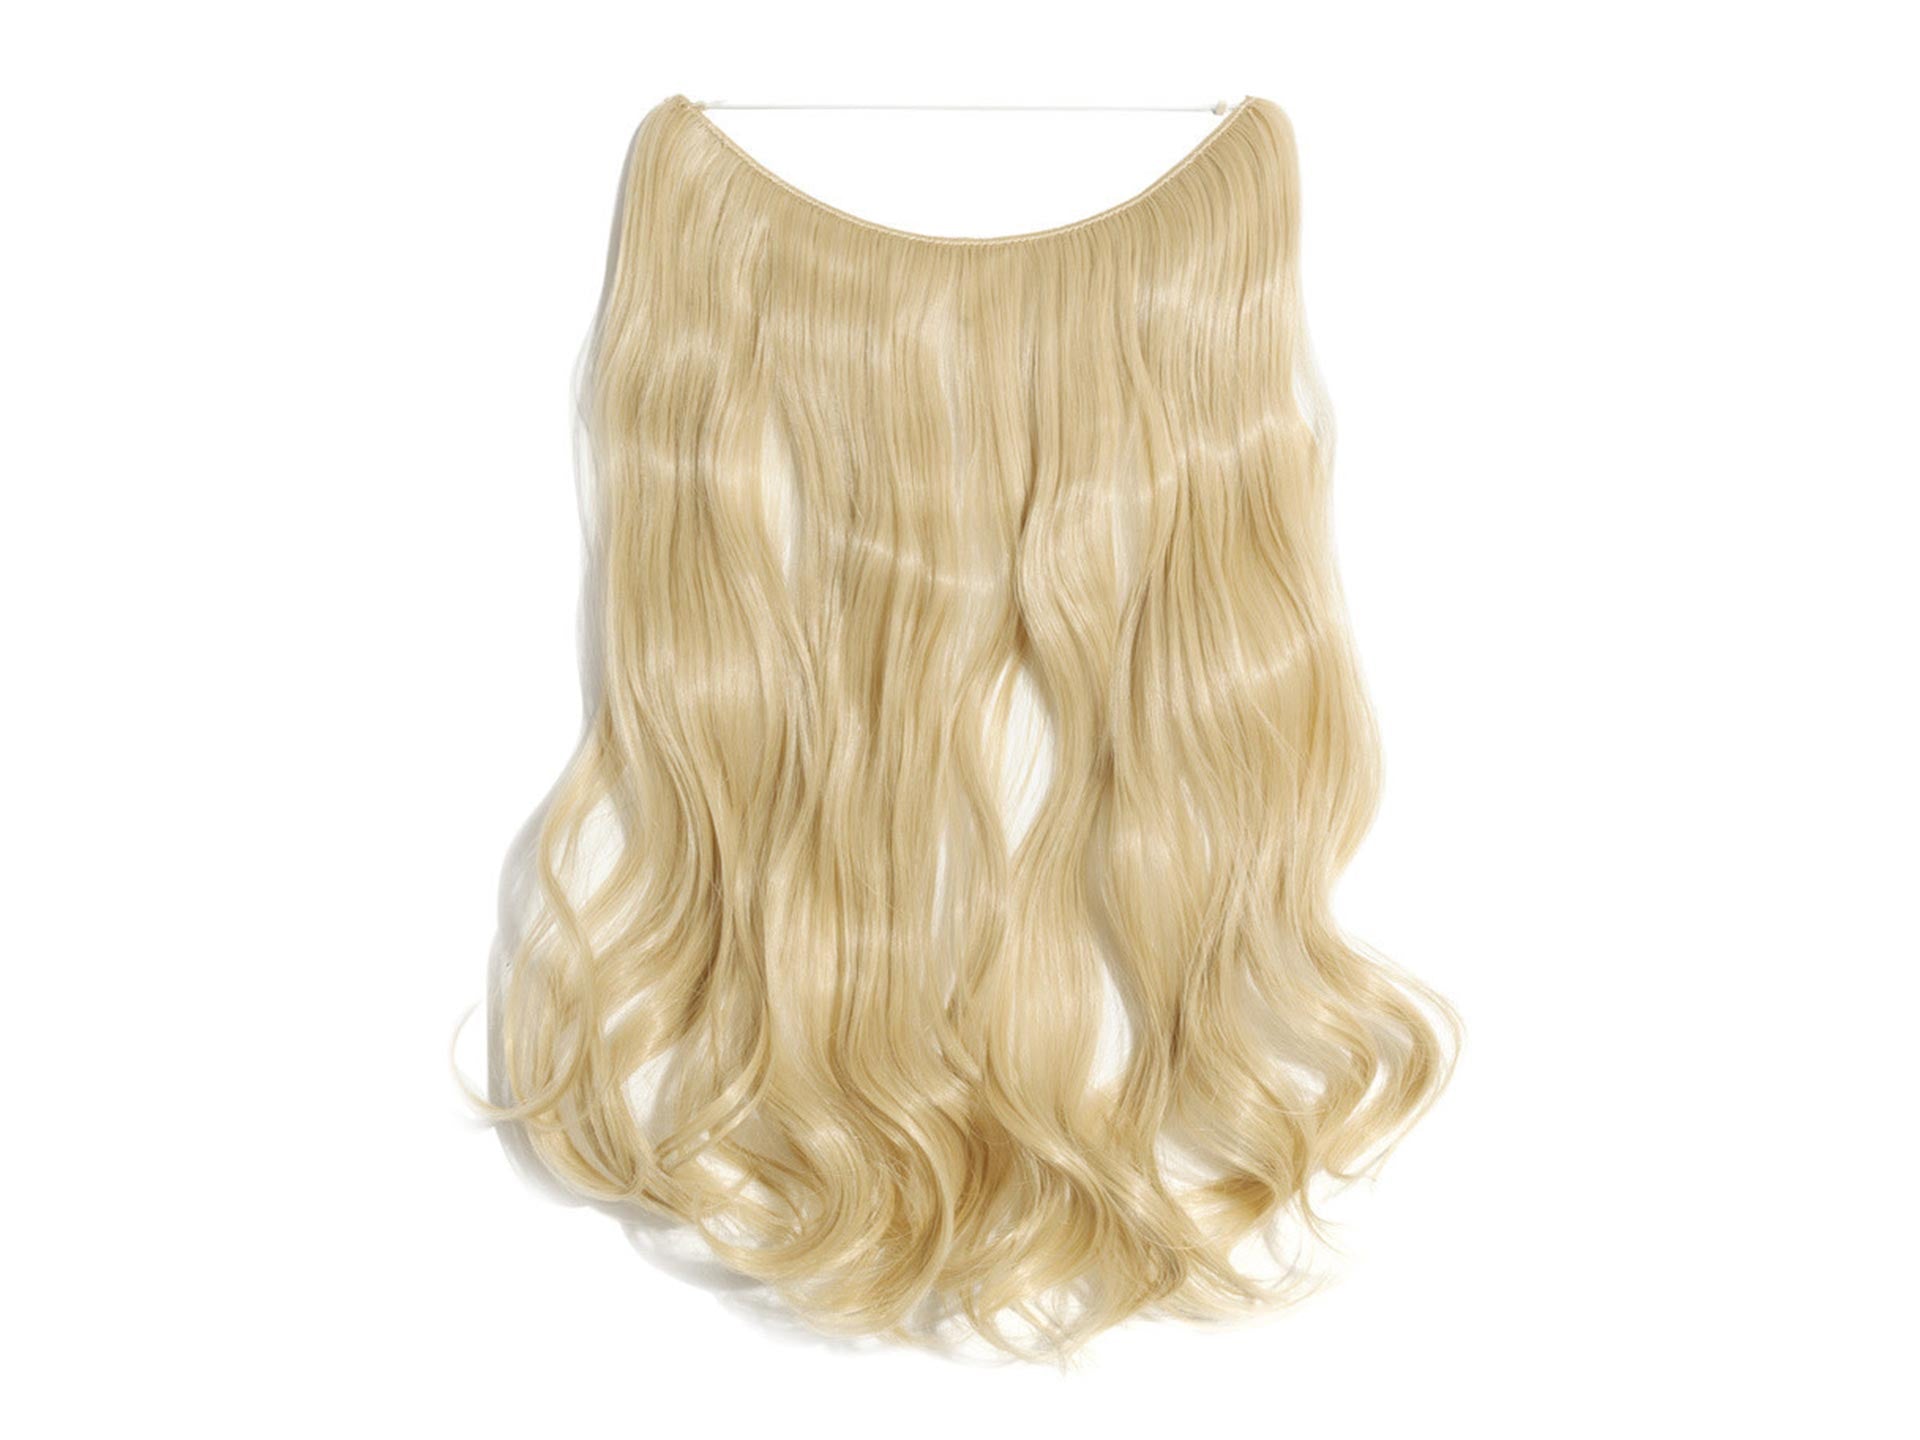 7. Blonde Ombre Halo Hair Extensions - wide 8